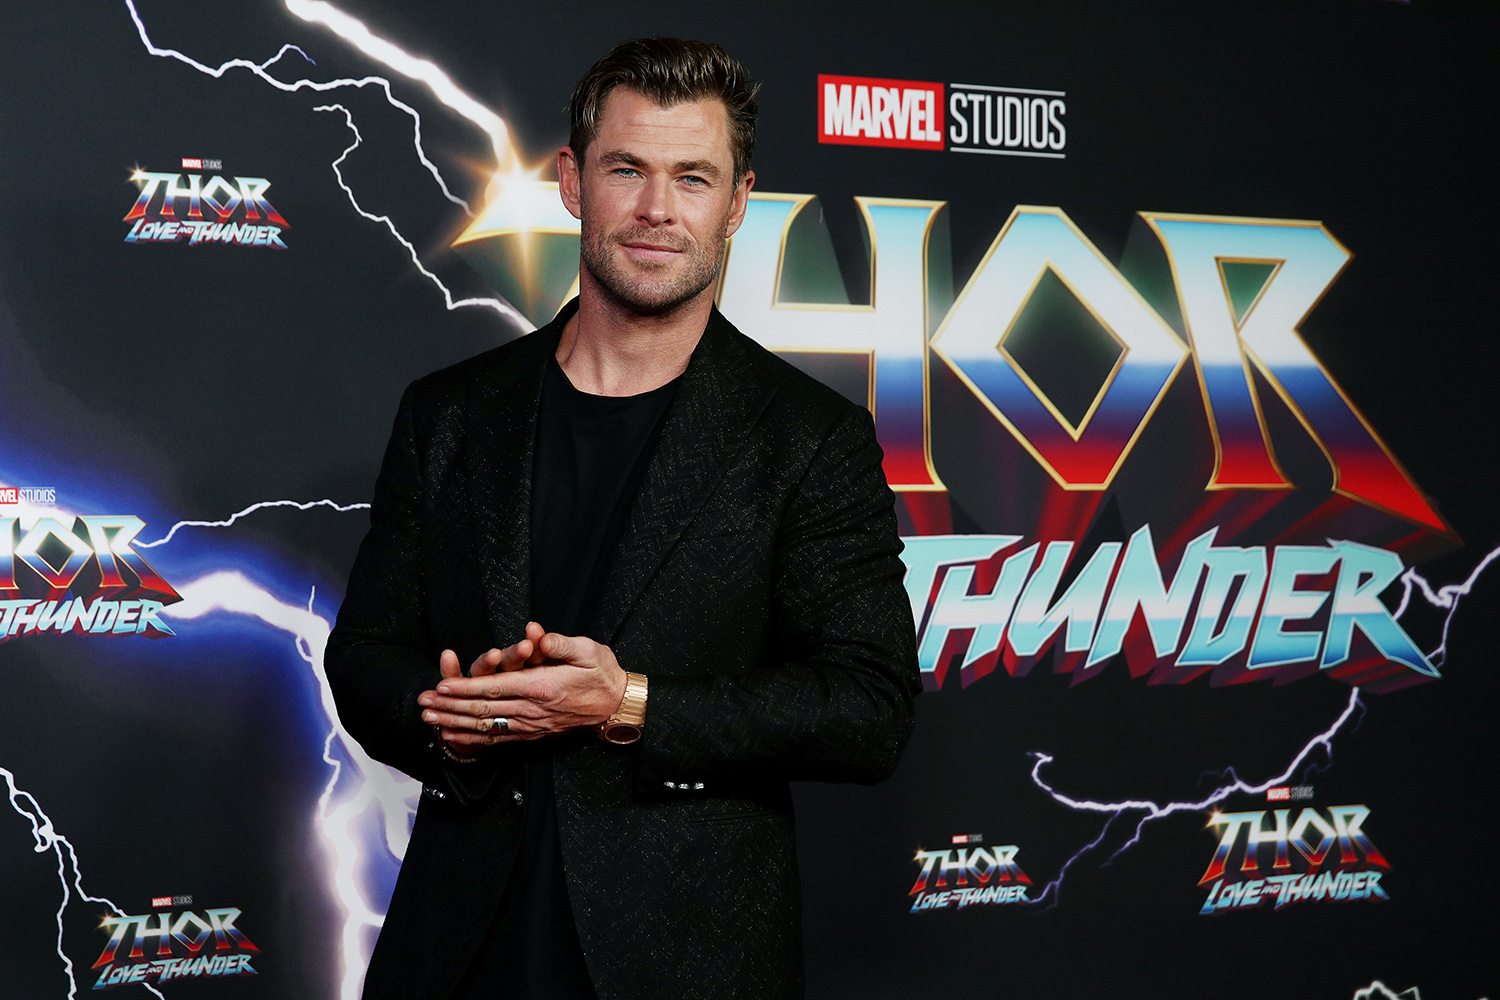 Thor actor Chris Hemsworth attends the Thor: Love and Thunder premiere in Australia